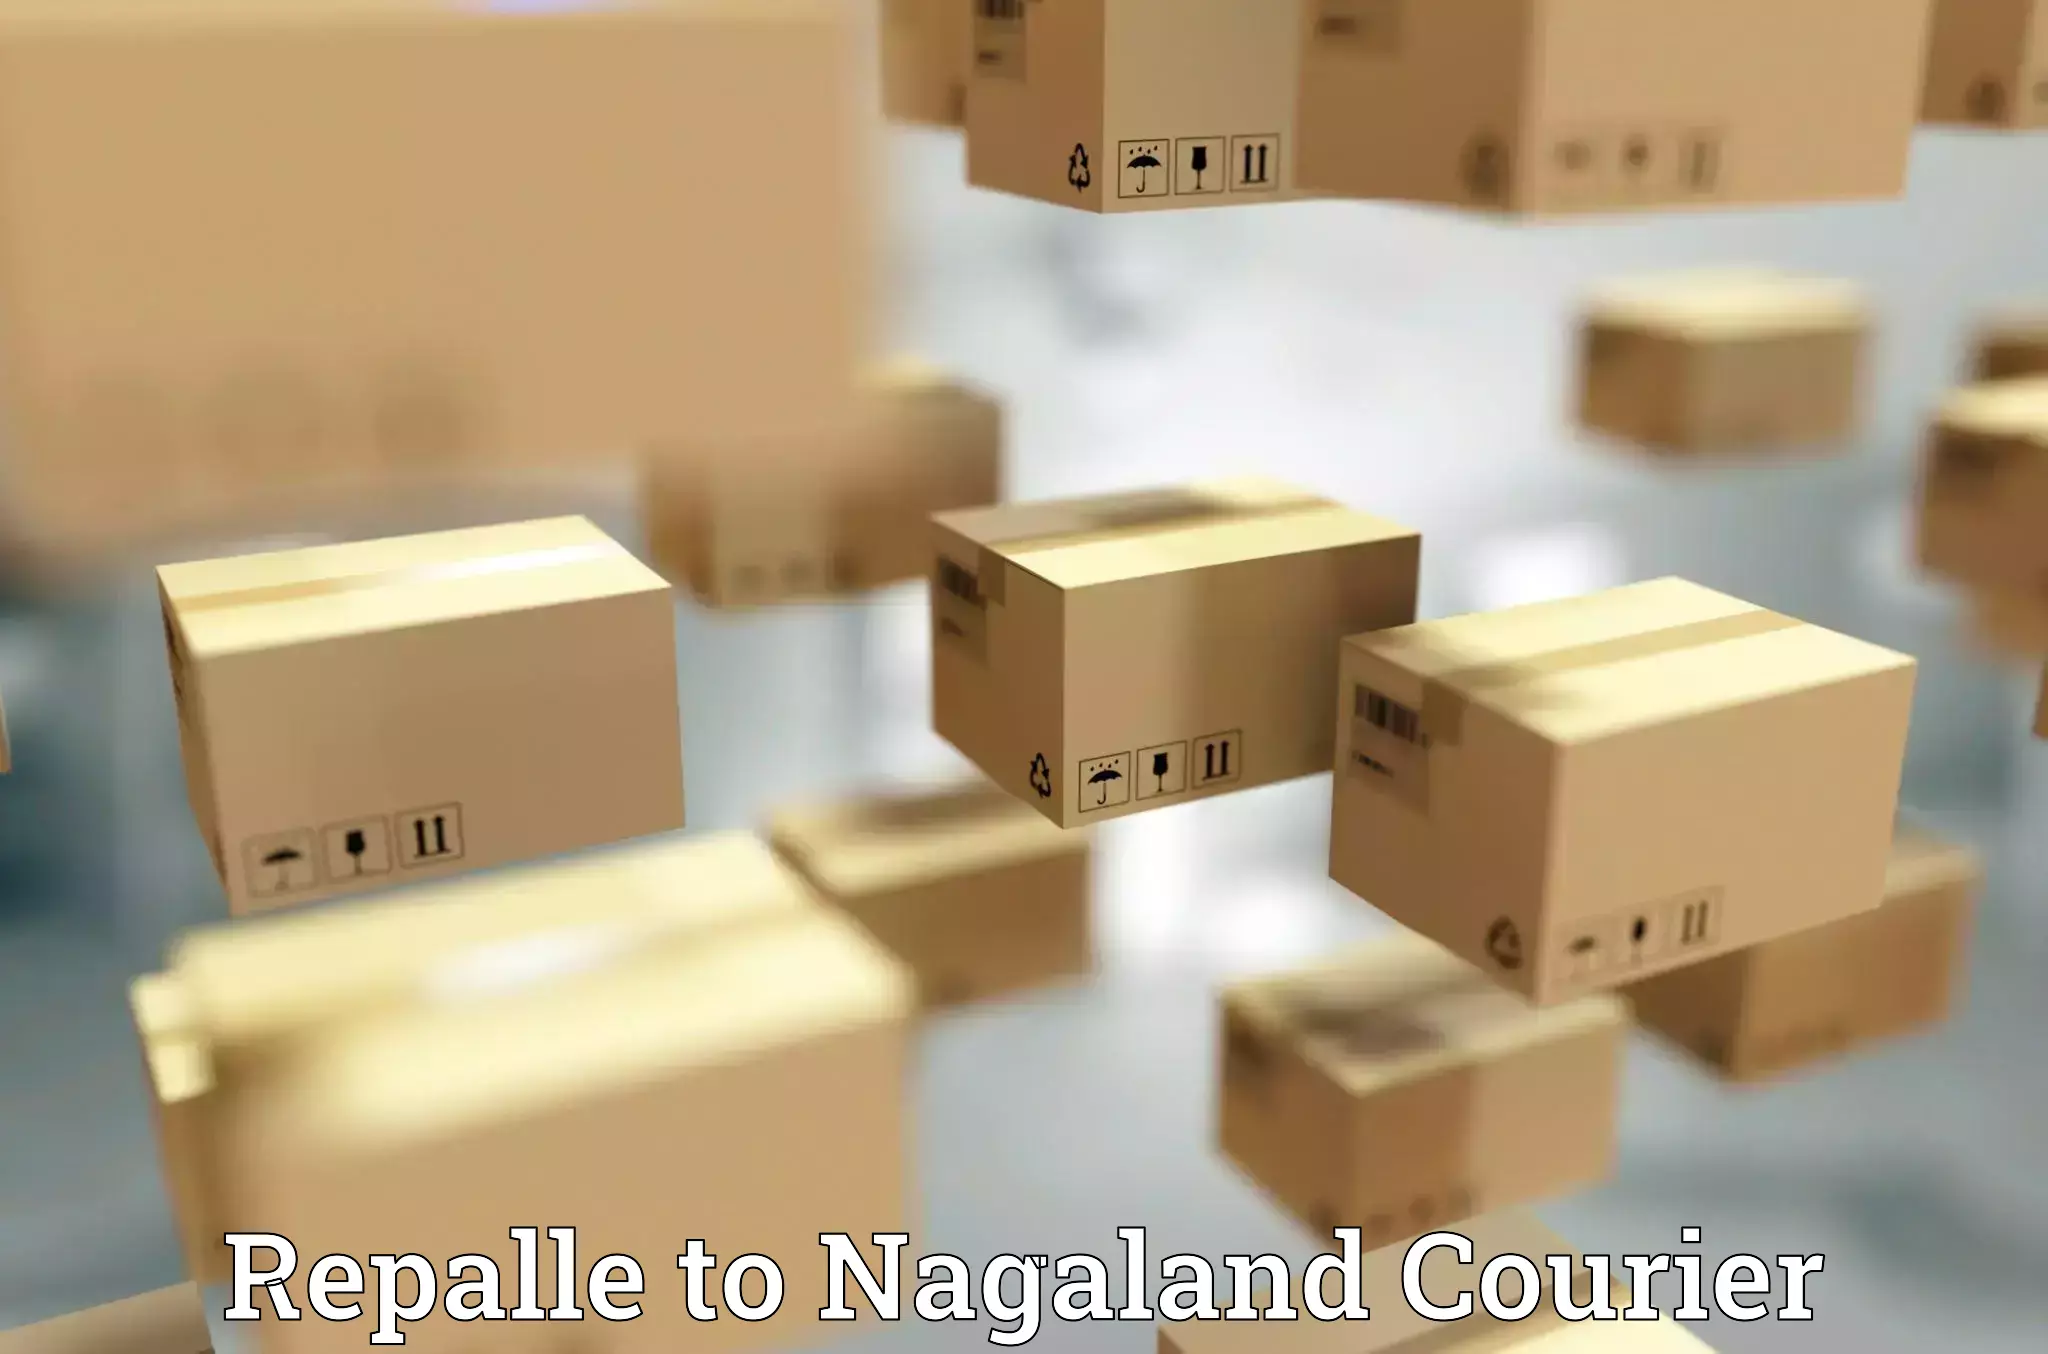 Luggage shipping discounts Repalle to Nagaland